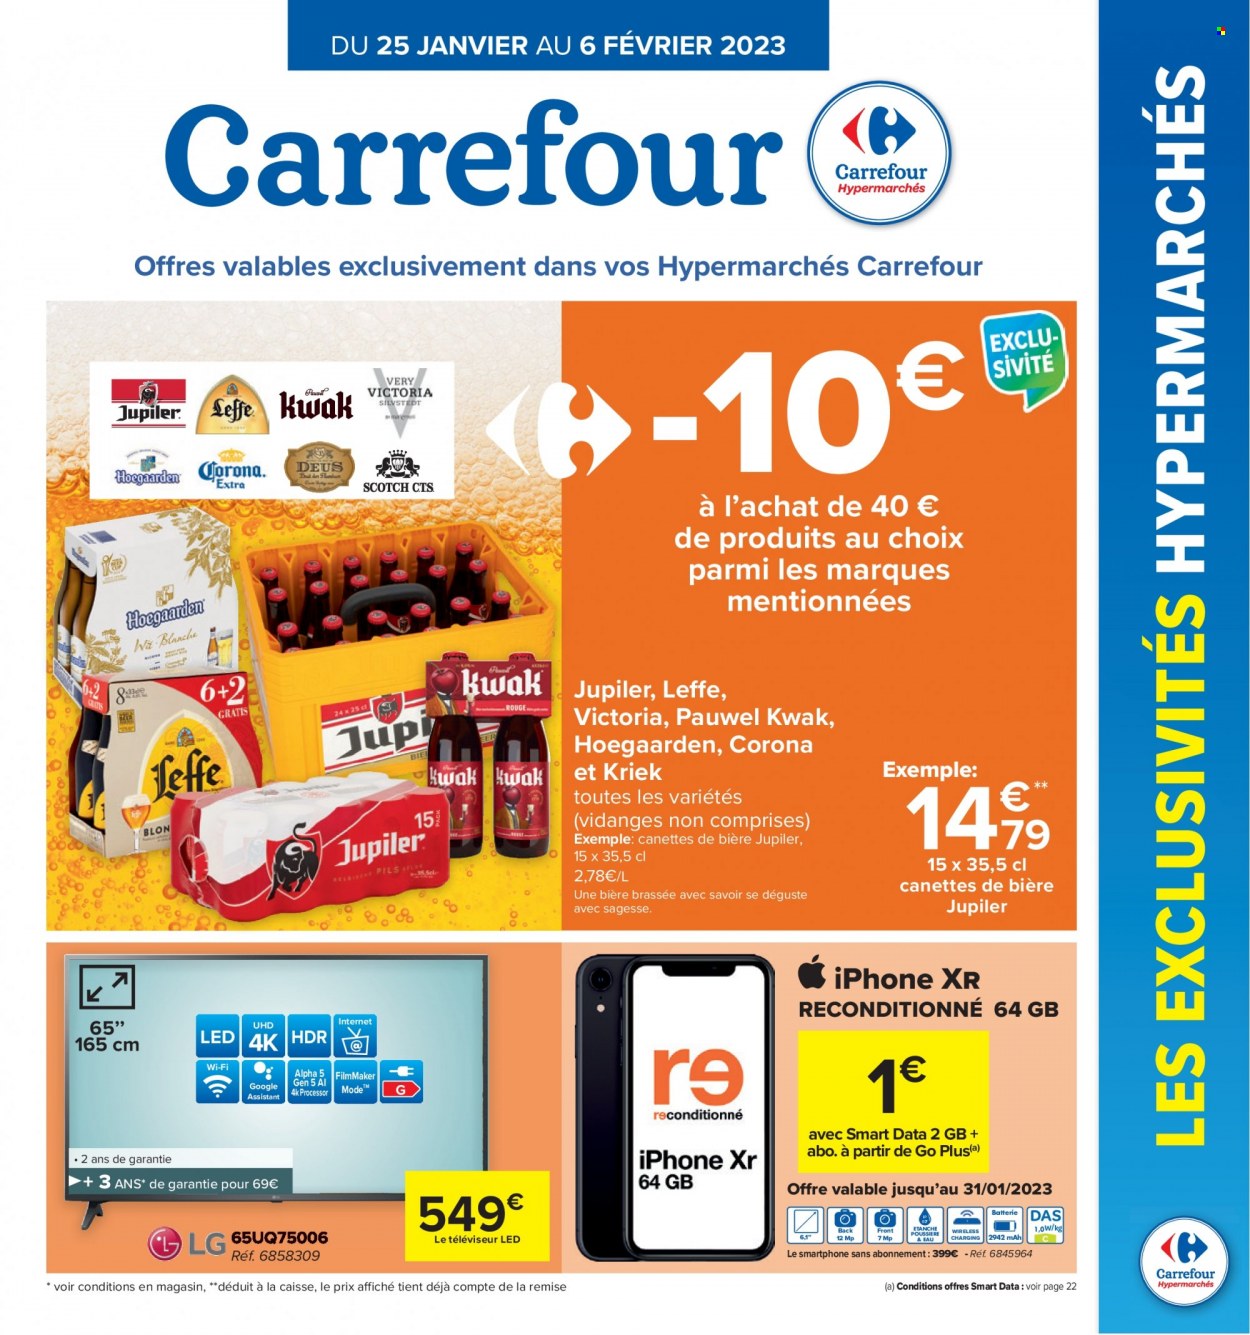 Catalogue Carrefour hypermarkt - 25.1.2023 - 6.2.2023. Page 1.